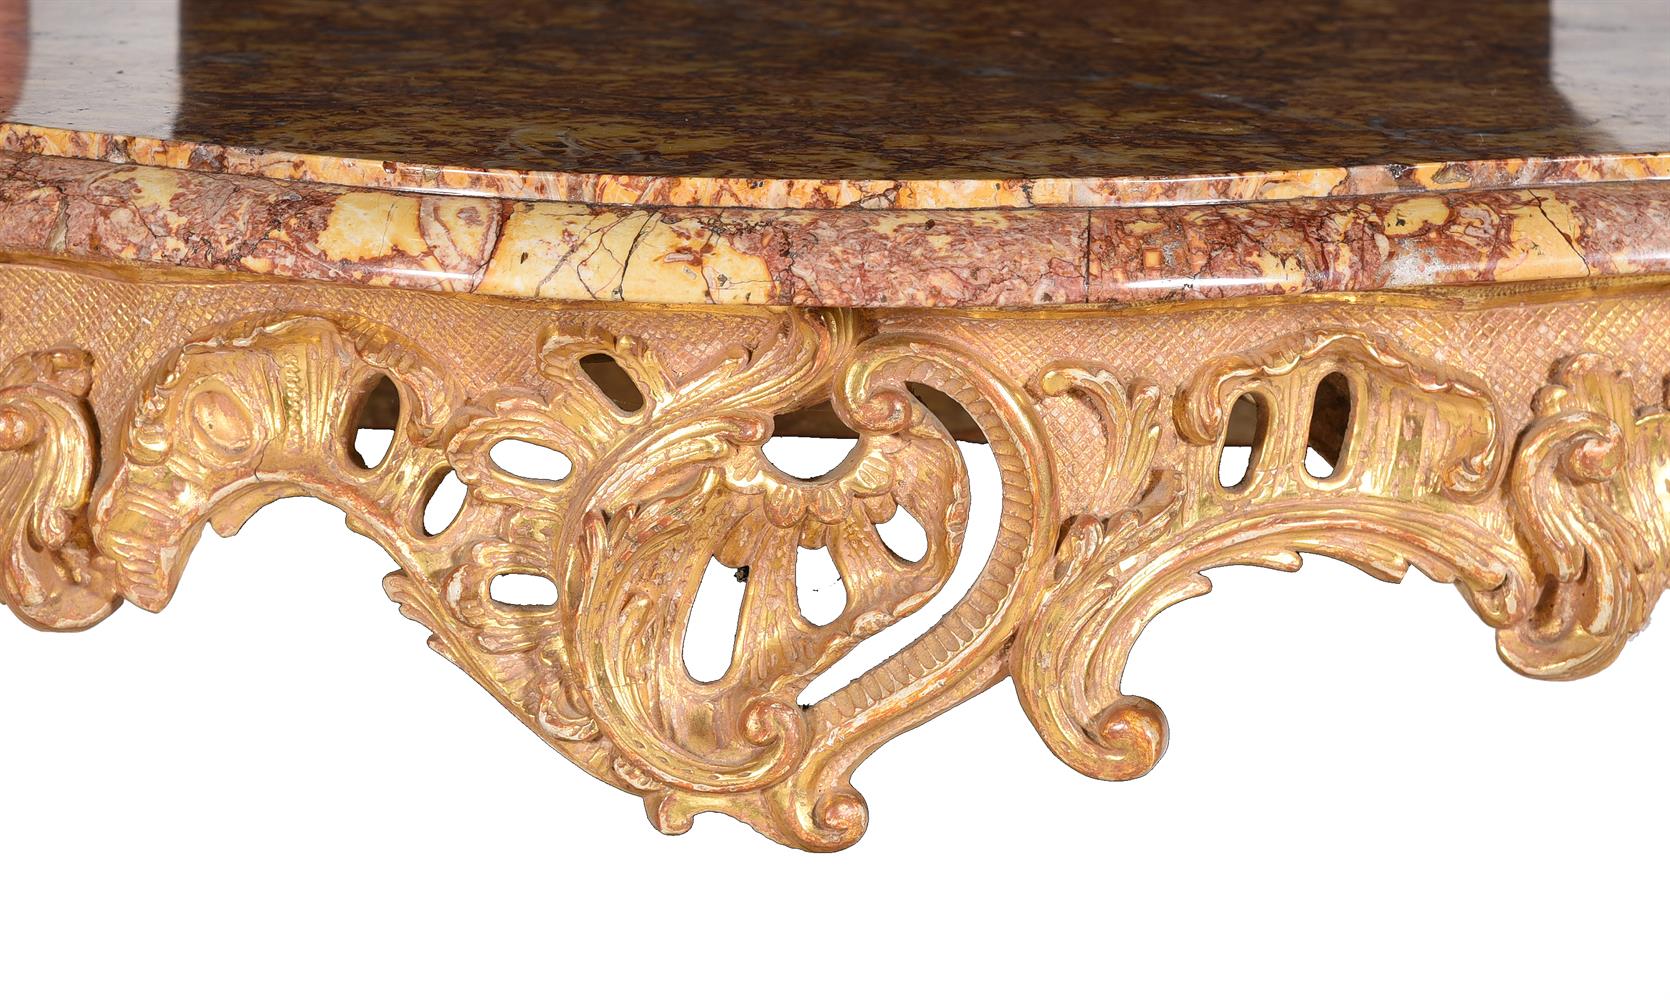 A PAIR OF LOUIS XV CARVED GILTWOOD CONSOLE TABLES, MID 18TH CENTURY - Image 3 of 10